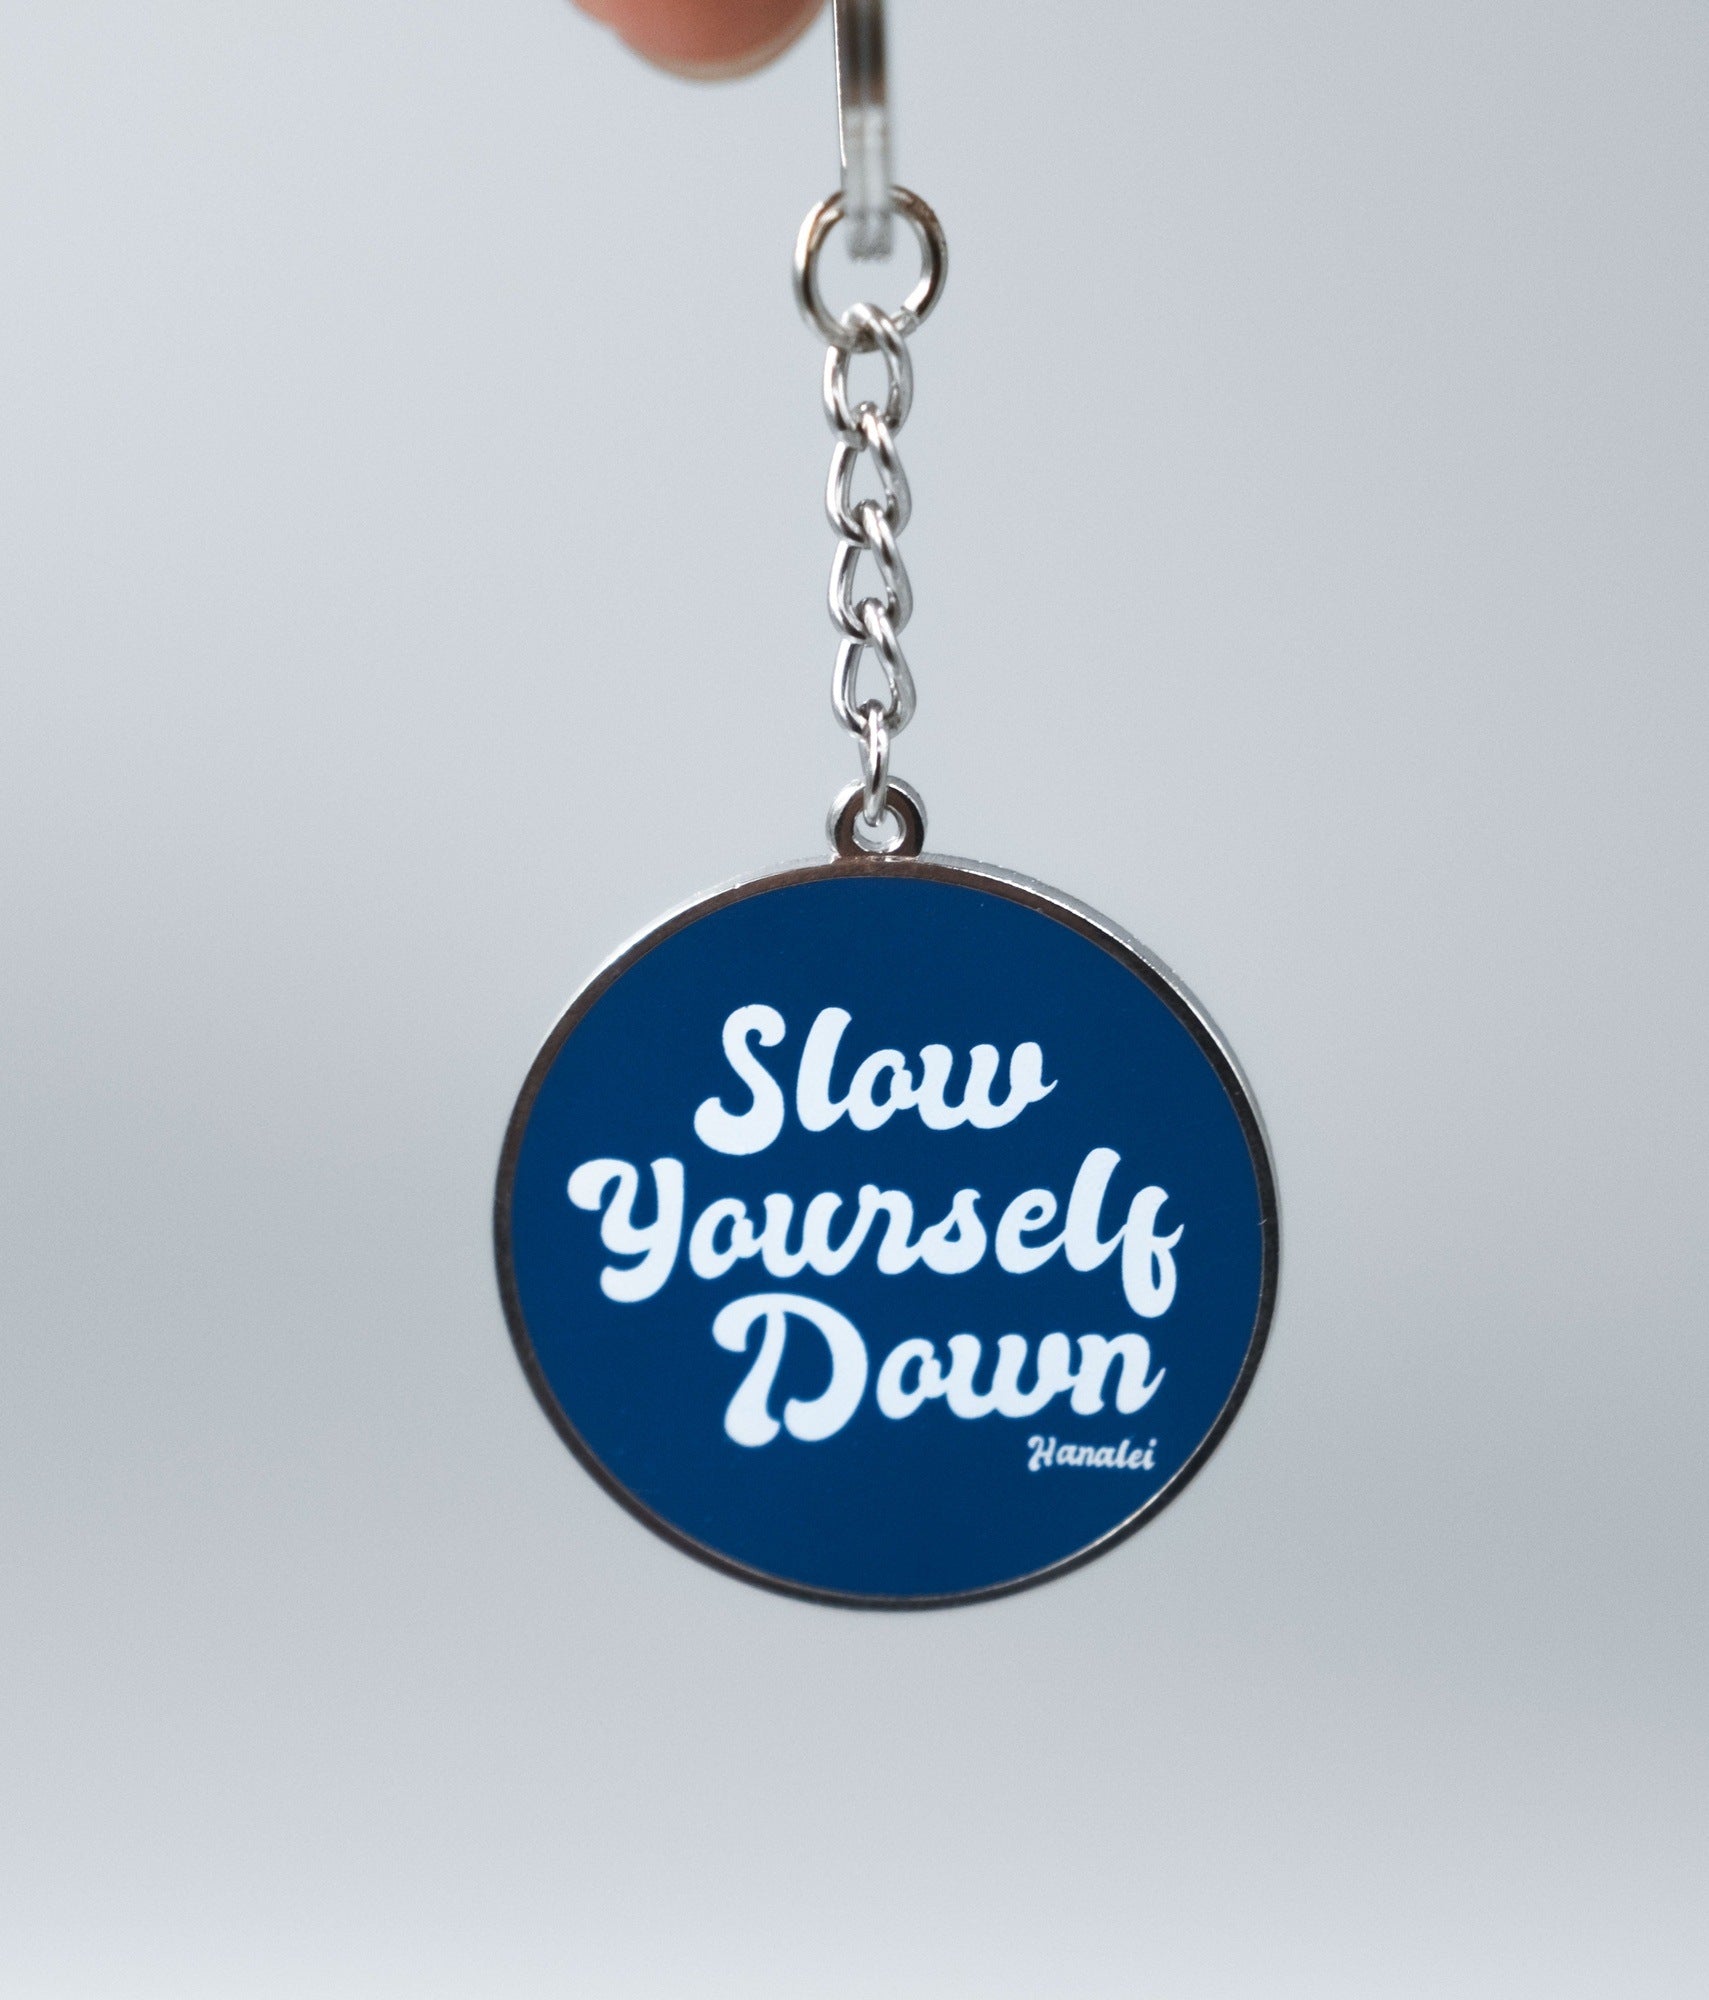 Small Blue Circle Keychain Keychains - Slow Yourself Down